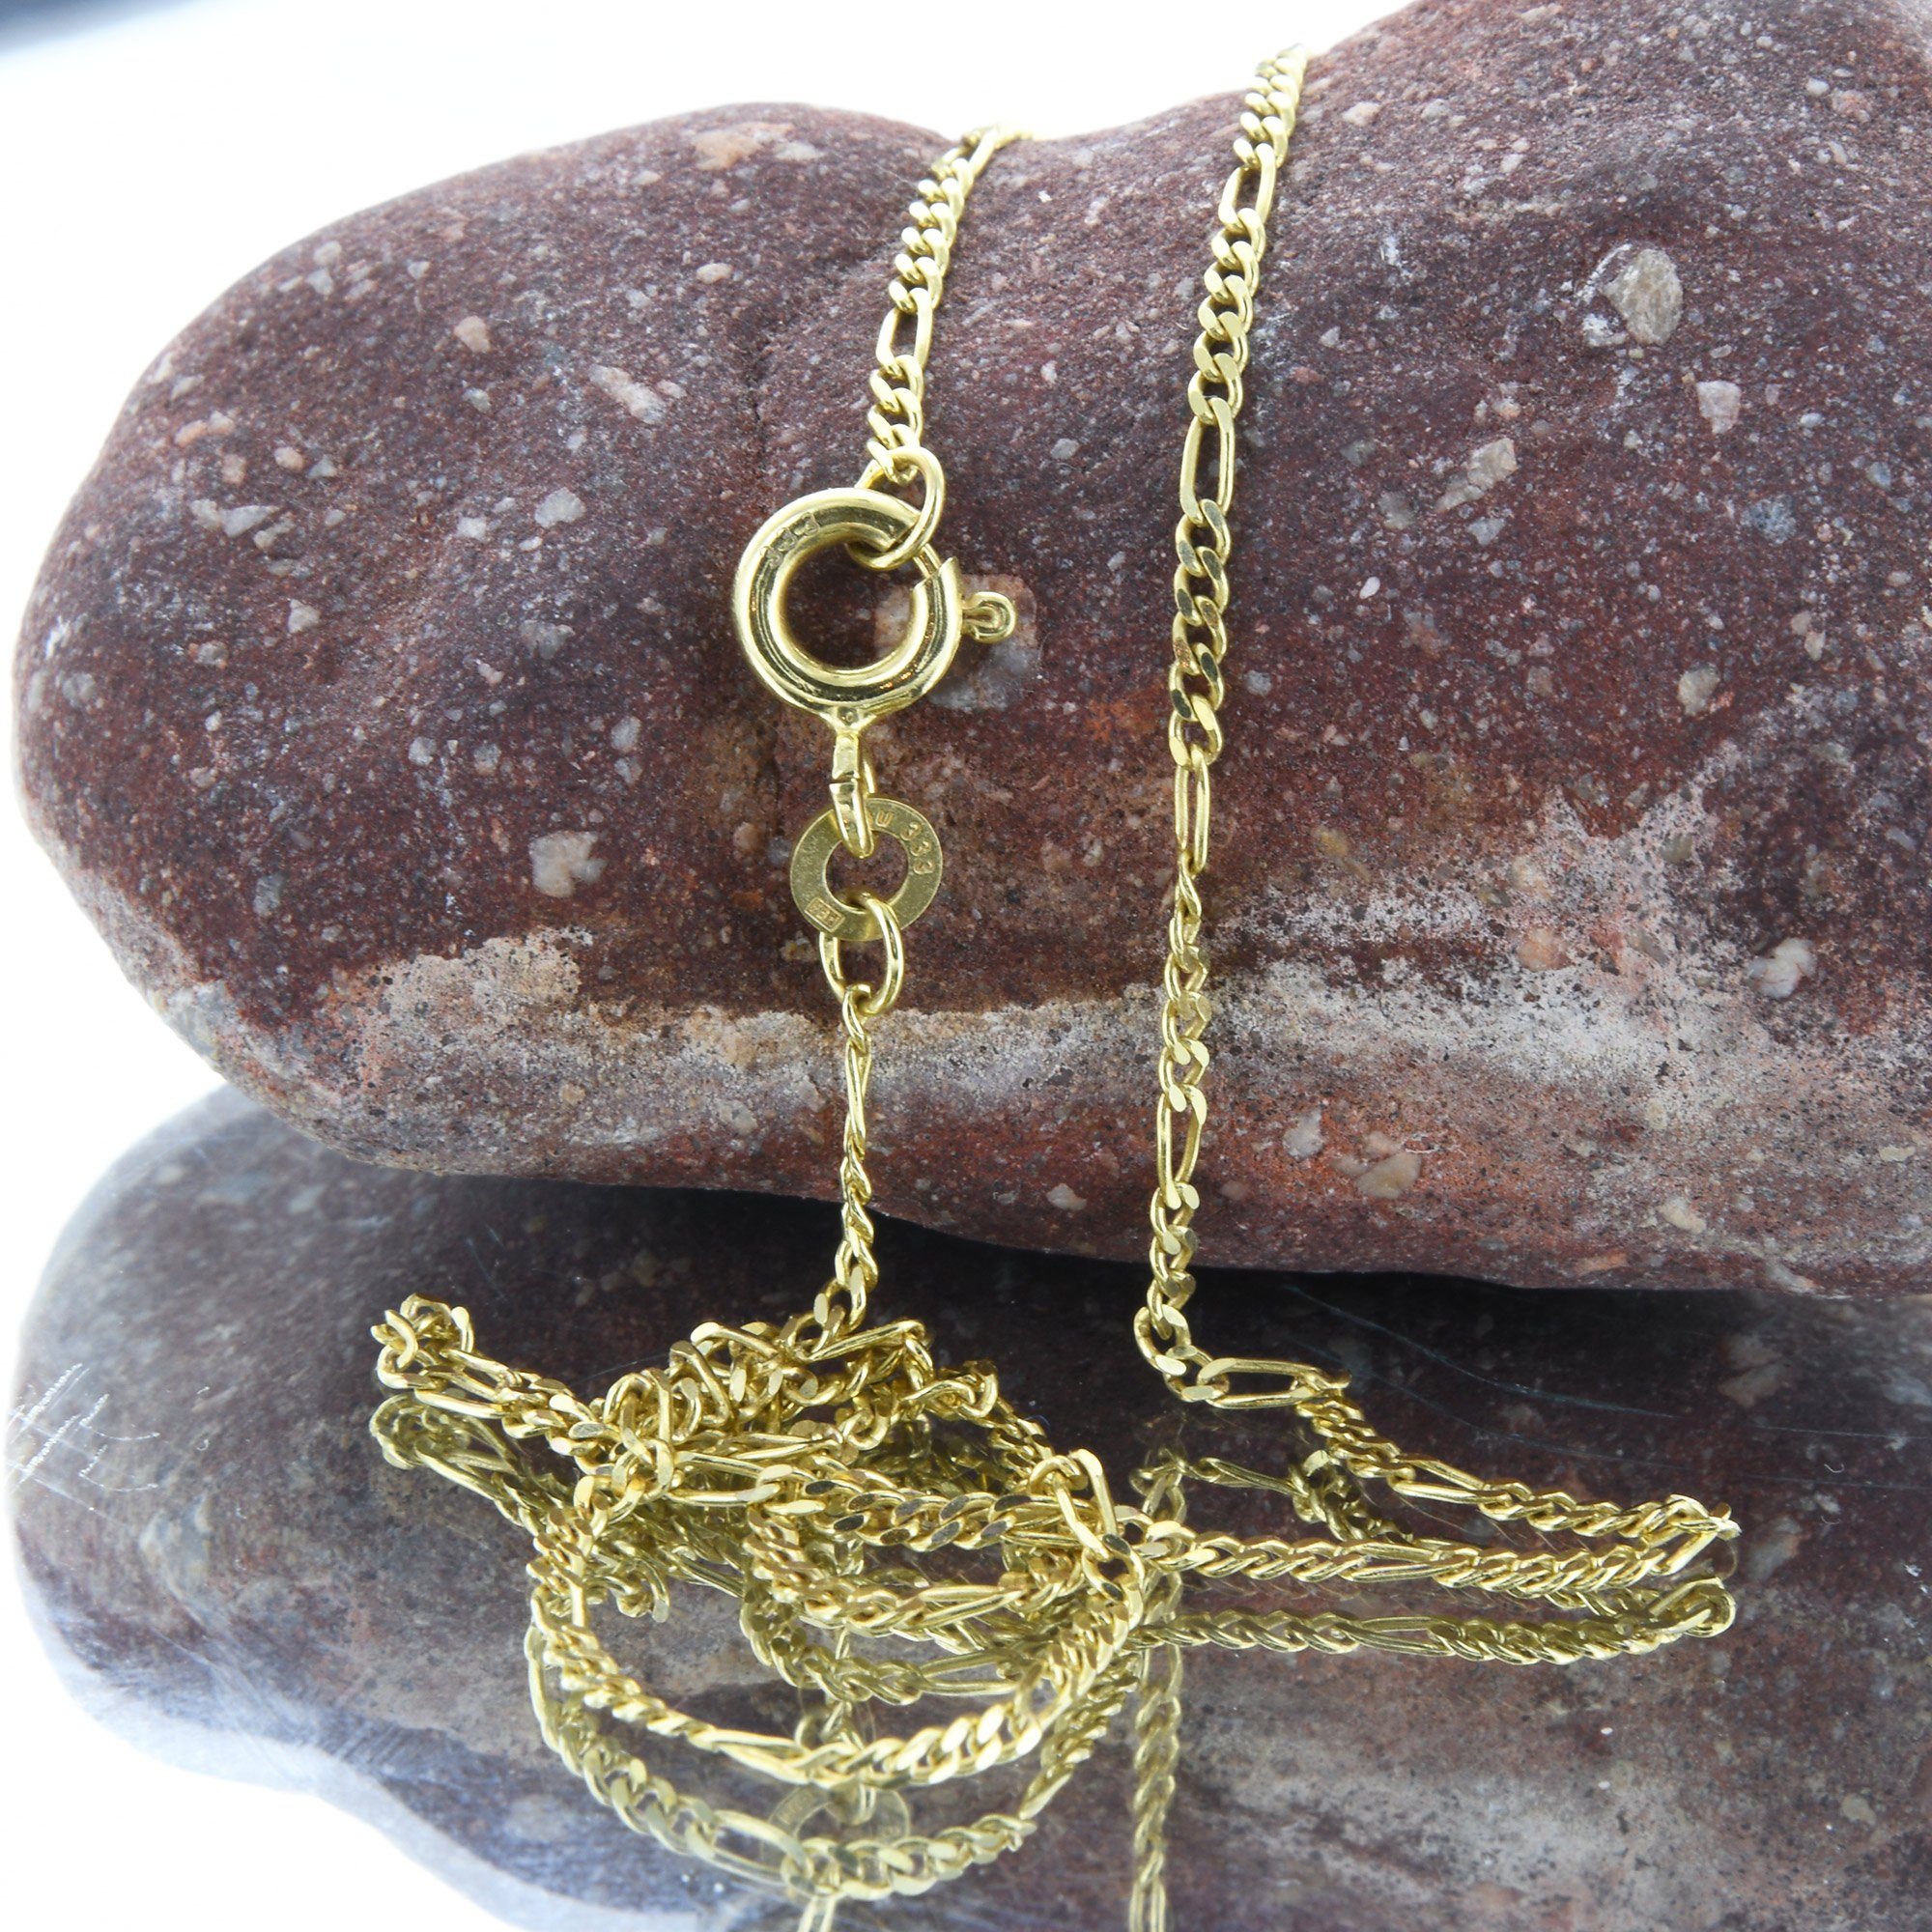 Goldkette, HOPLO in Germany Made